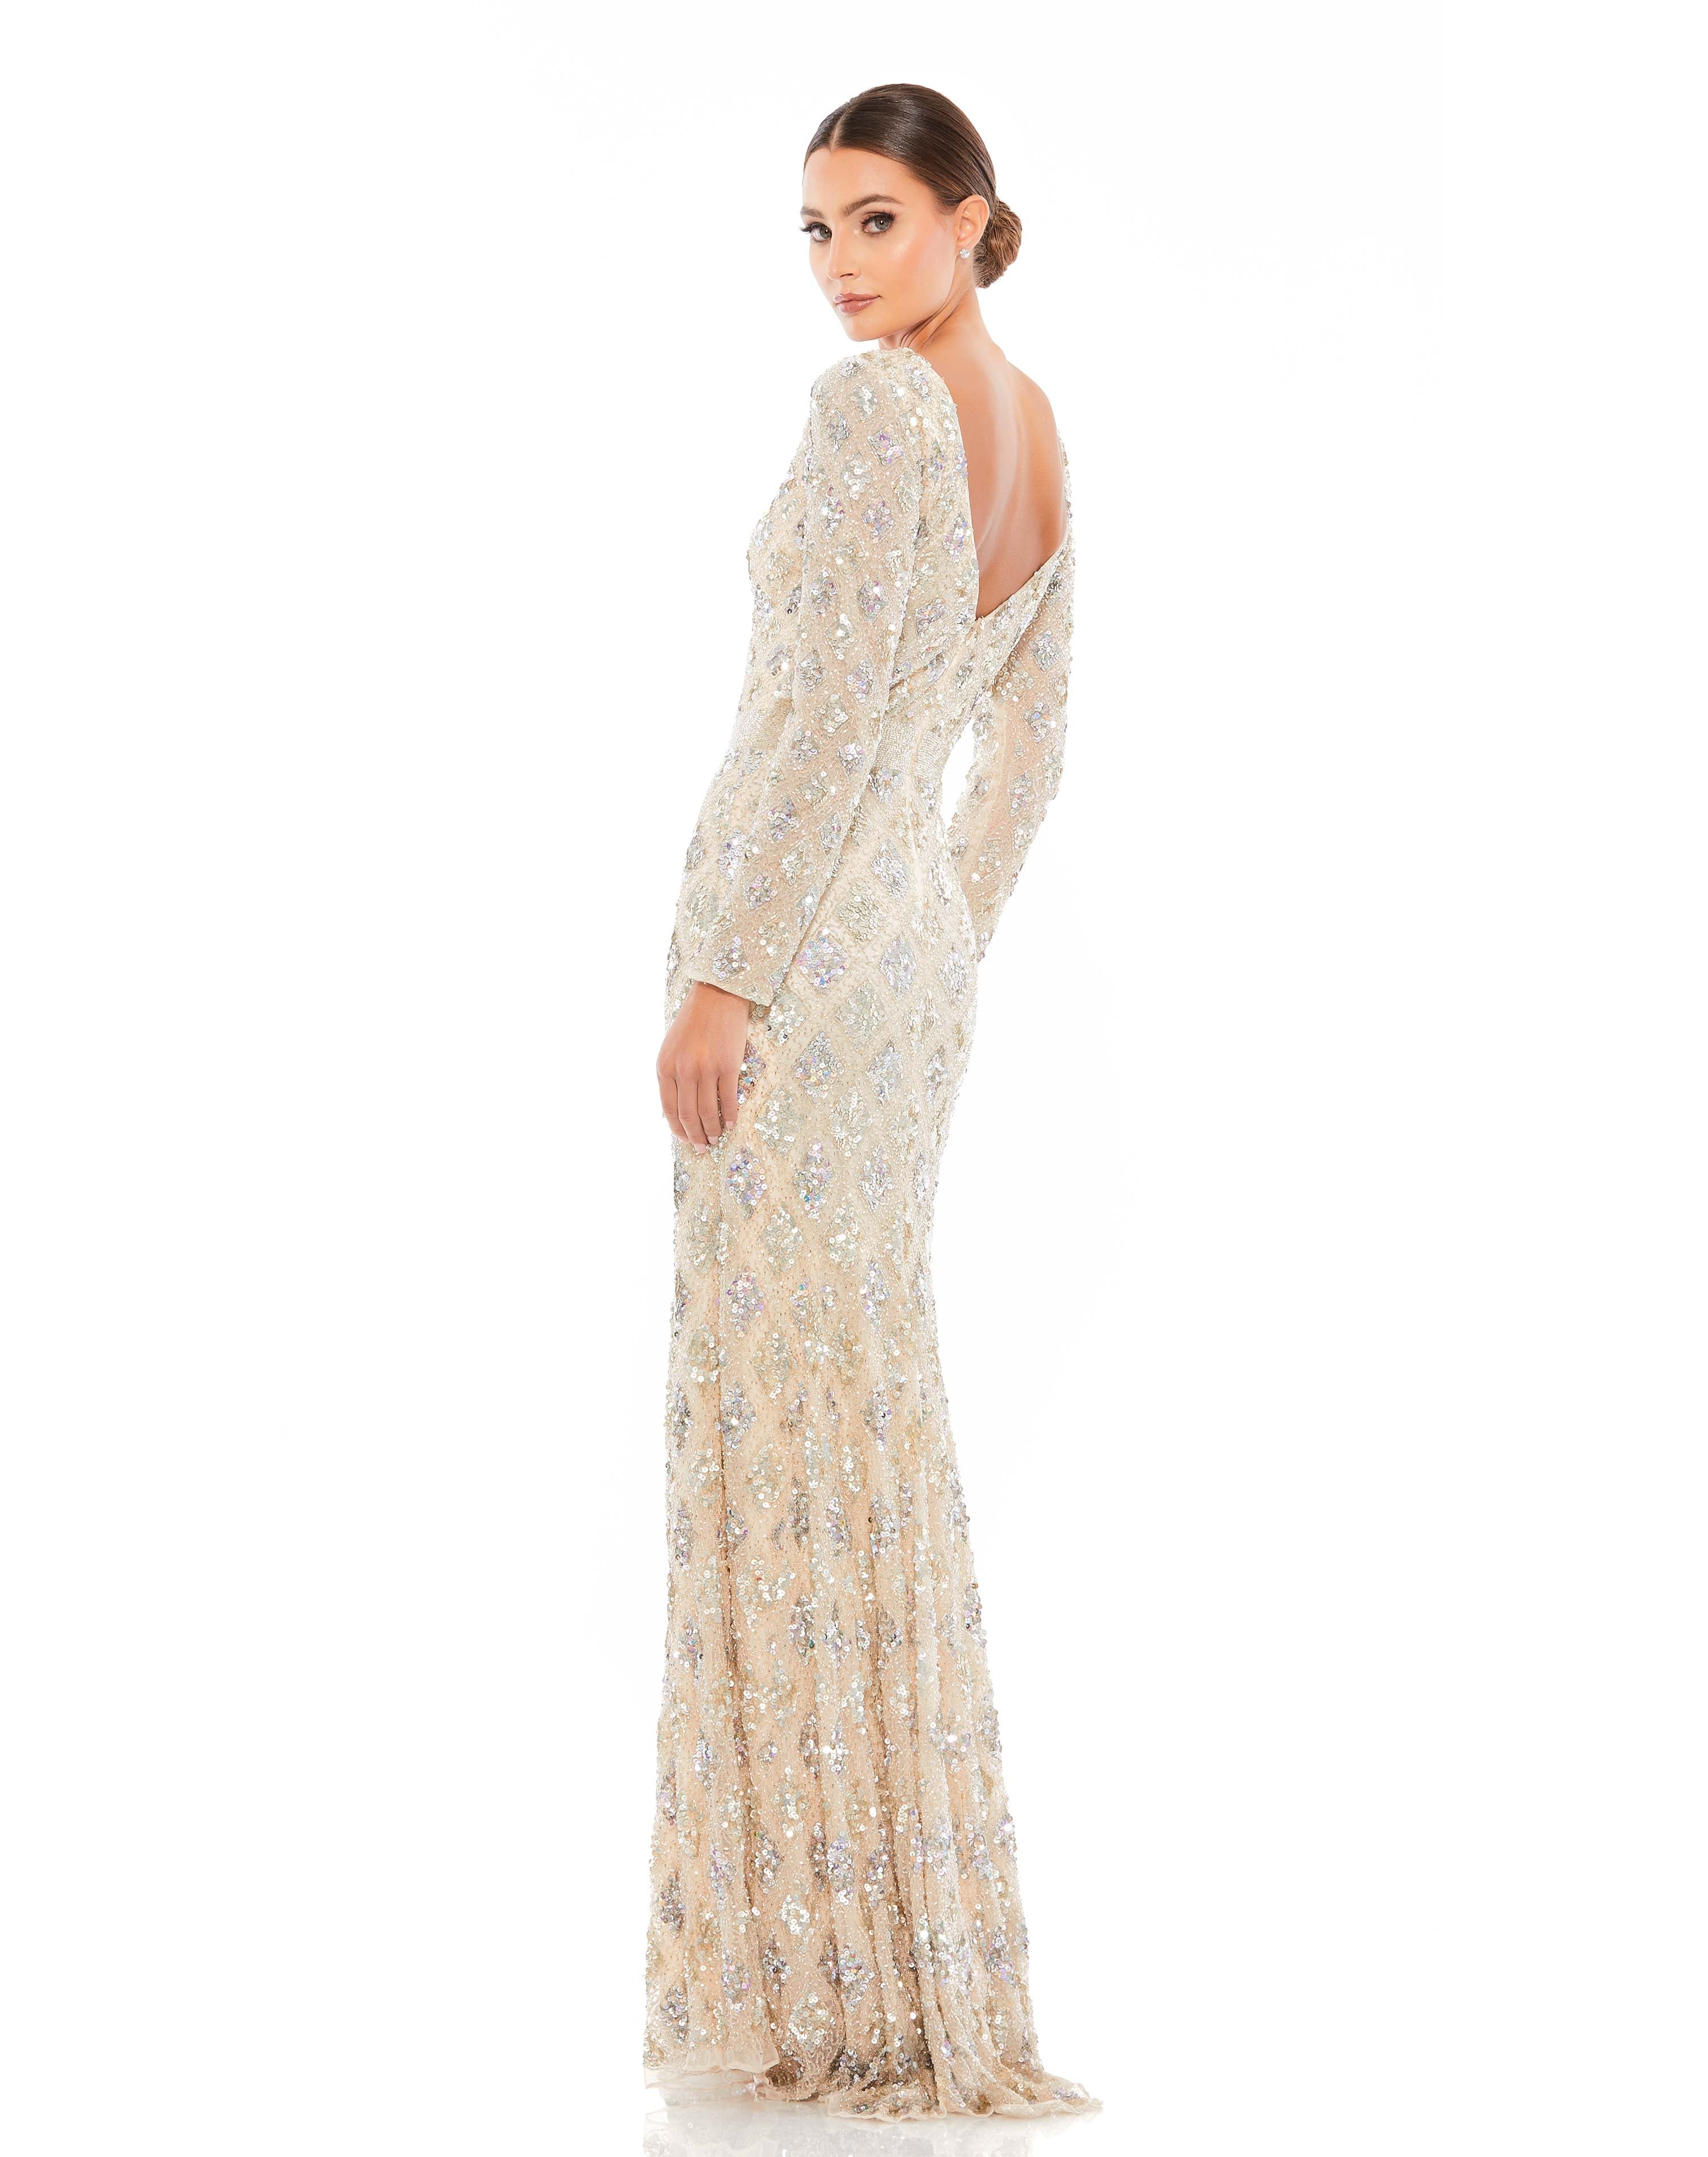 Geometric Embellished Evening Gown